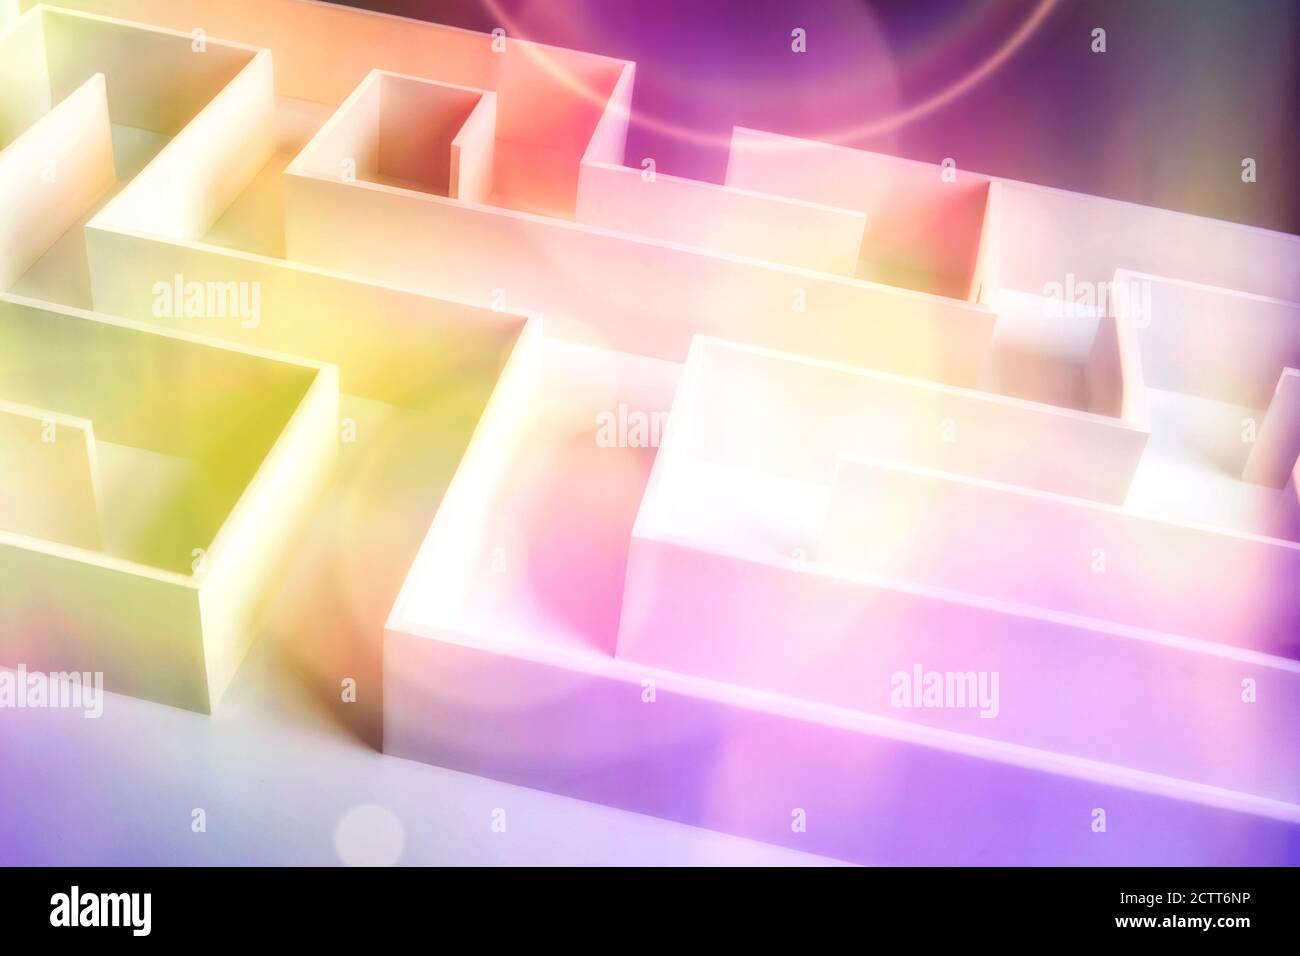 Maze with pastel colorful background Stock Photo